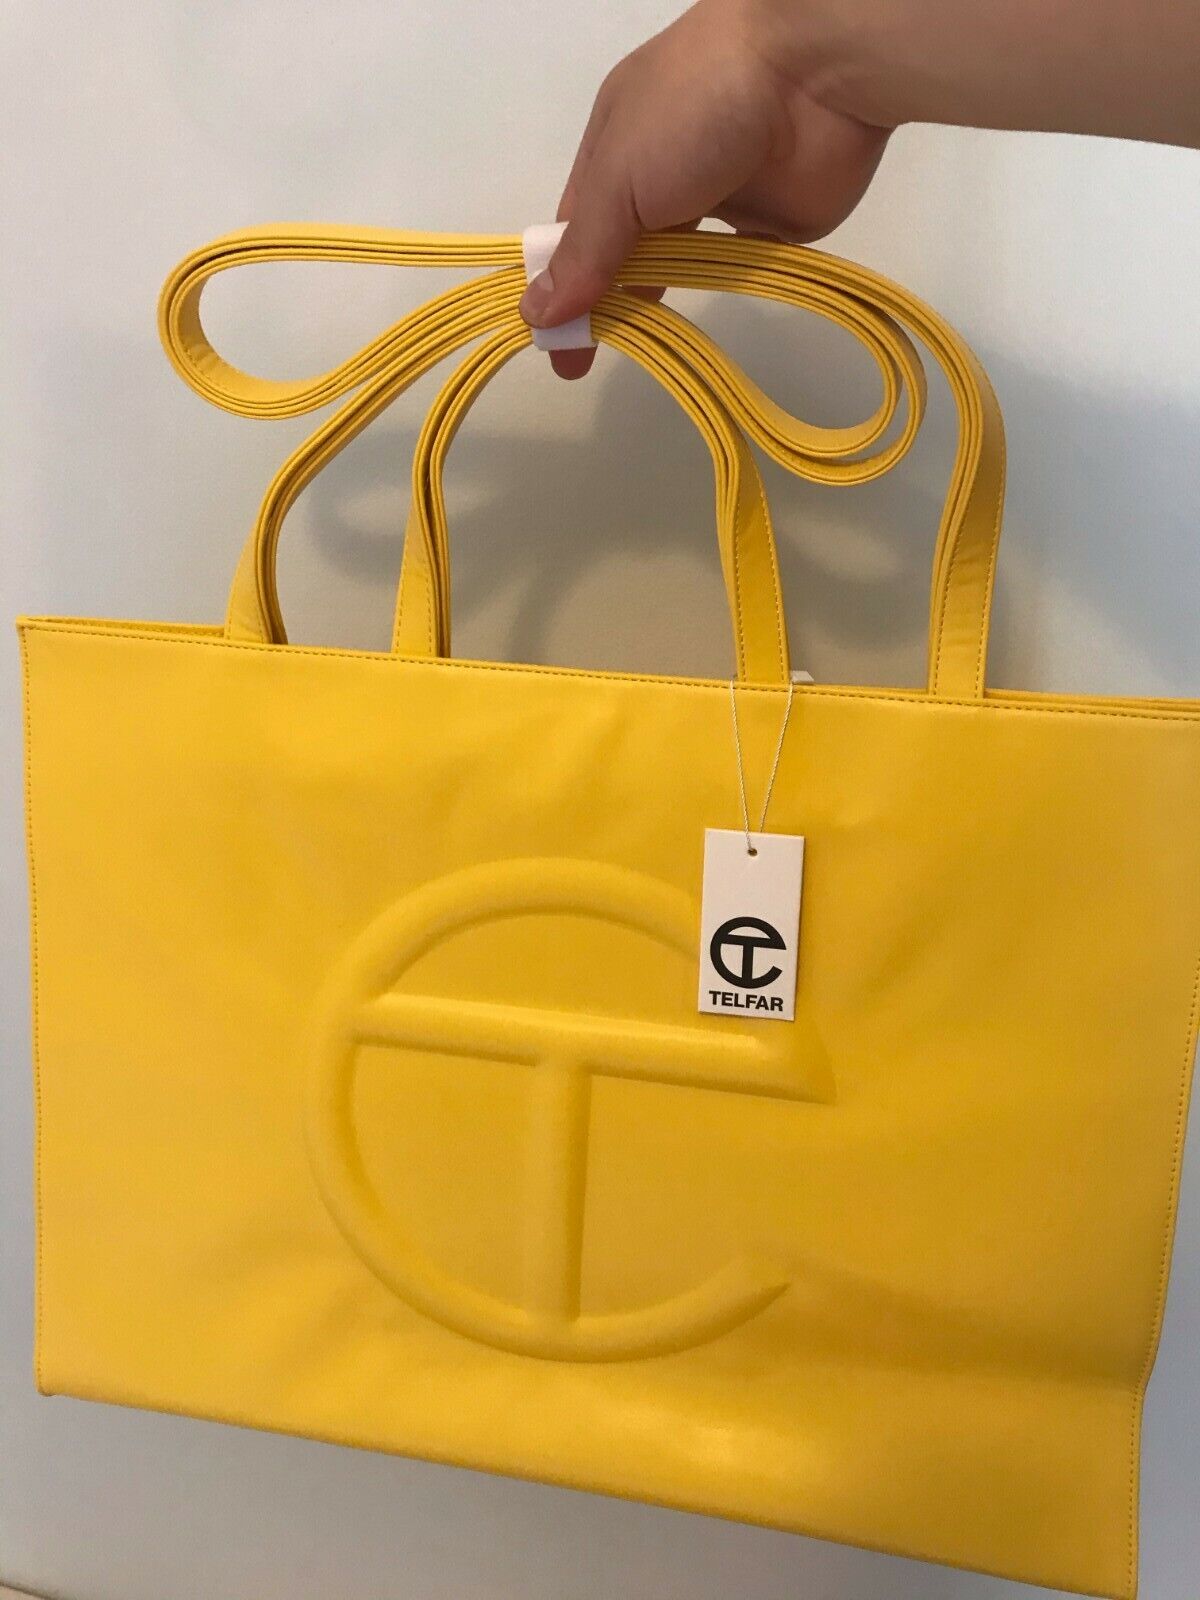 TELFAR Shopping Bag - Large Yellow (NEW WITH TAGS) for Sale ...